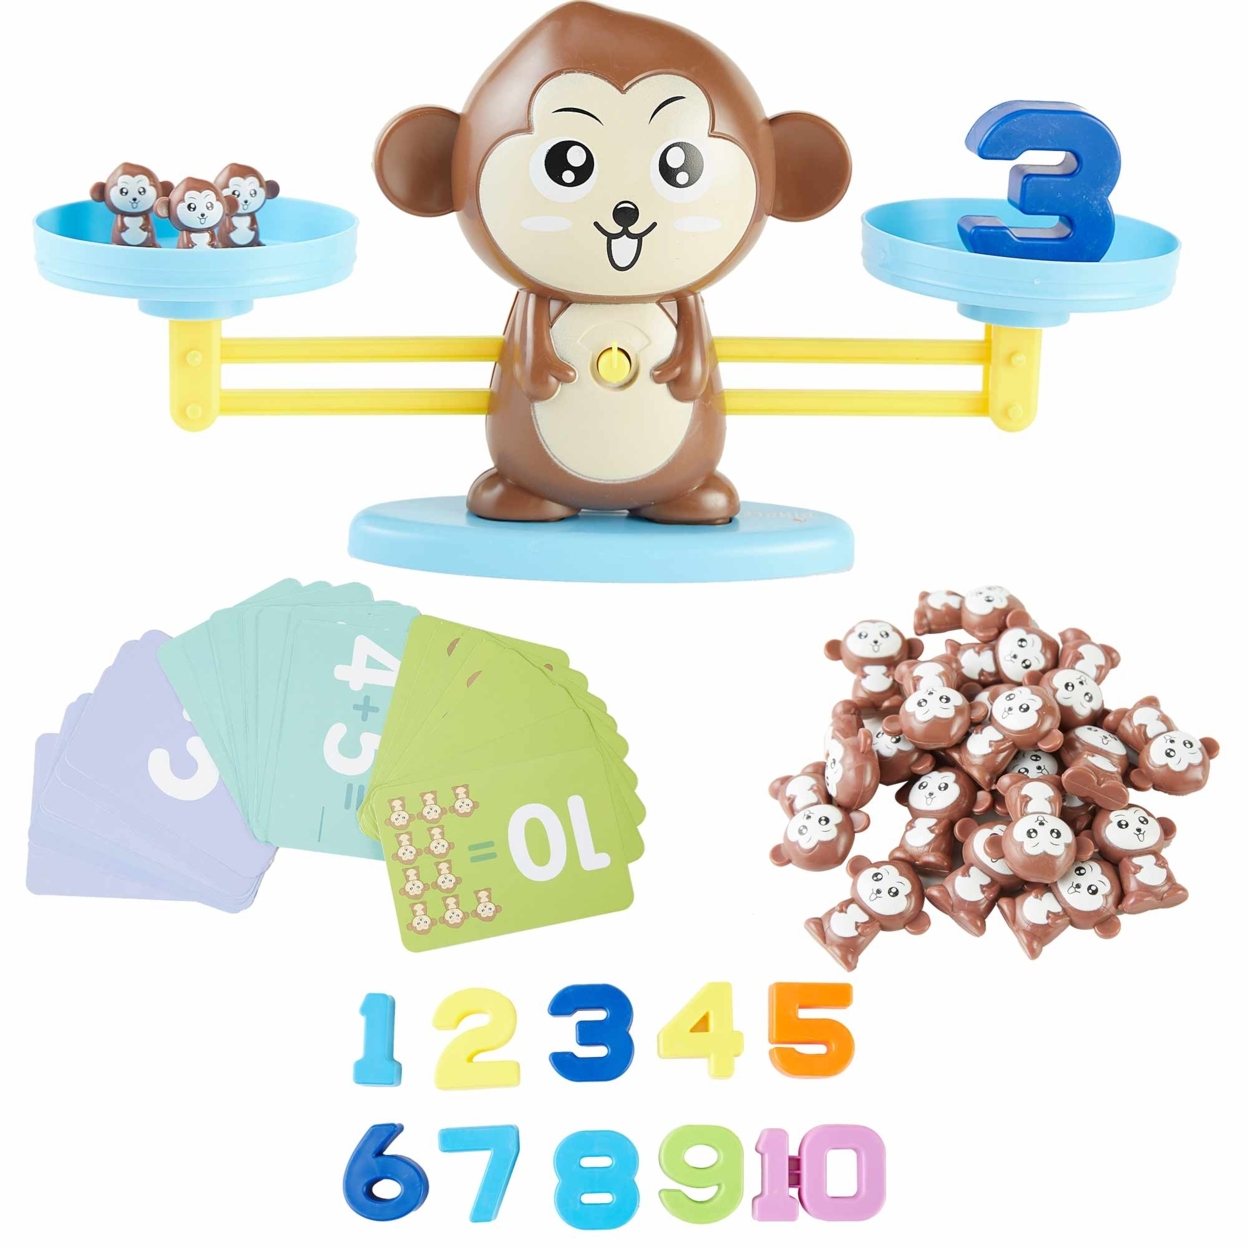 Dimple Monkey Balance Counting Educational Math Toy For Girls And Boys, Kindergarten Preschool Learning Numbers Toy, Kids Number Game